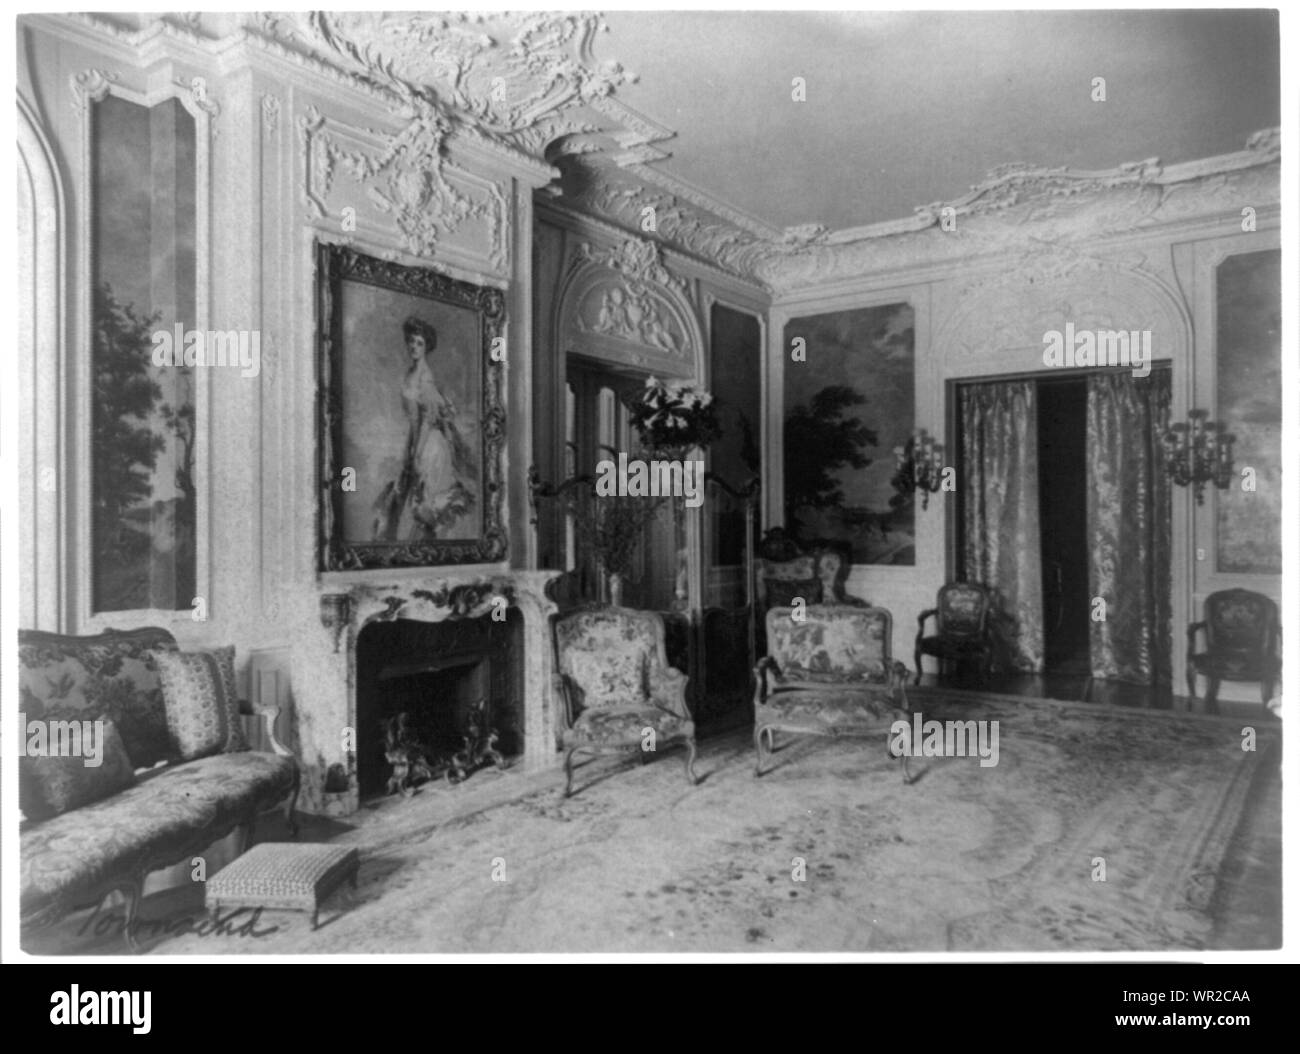 Mary Scott Townsend House, Wash., D.C.: Living room with fireplace ...